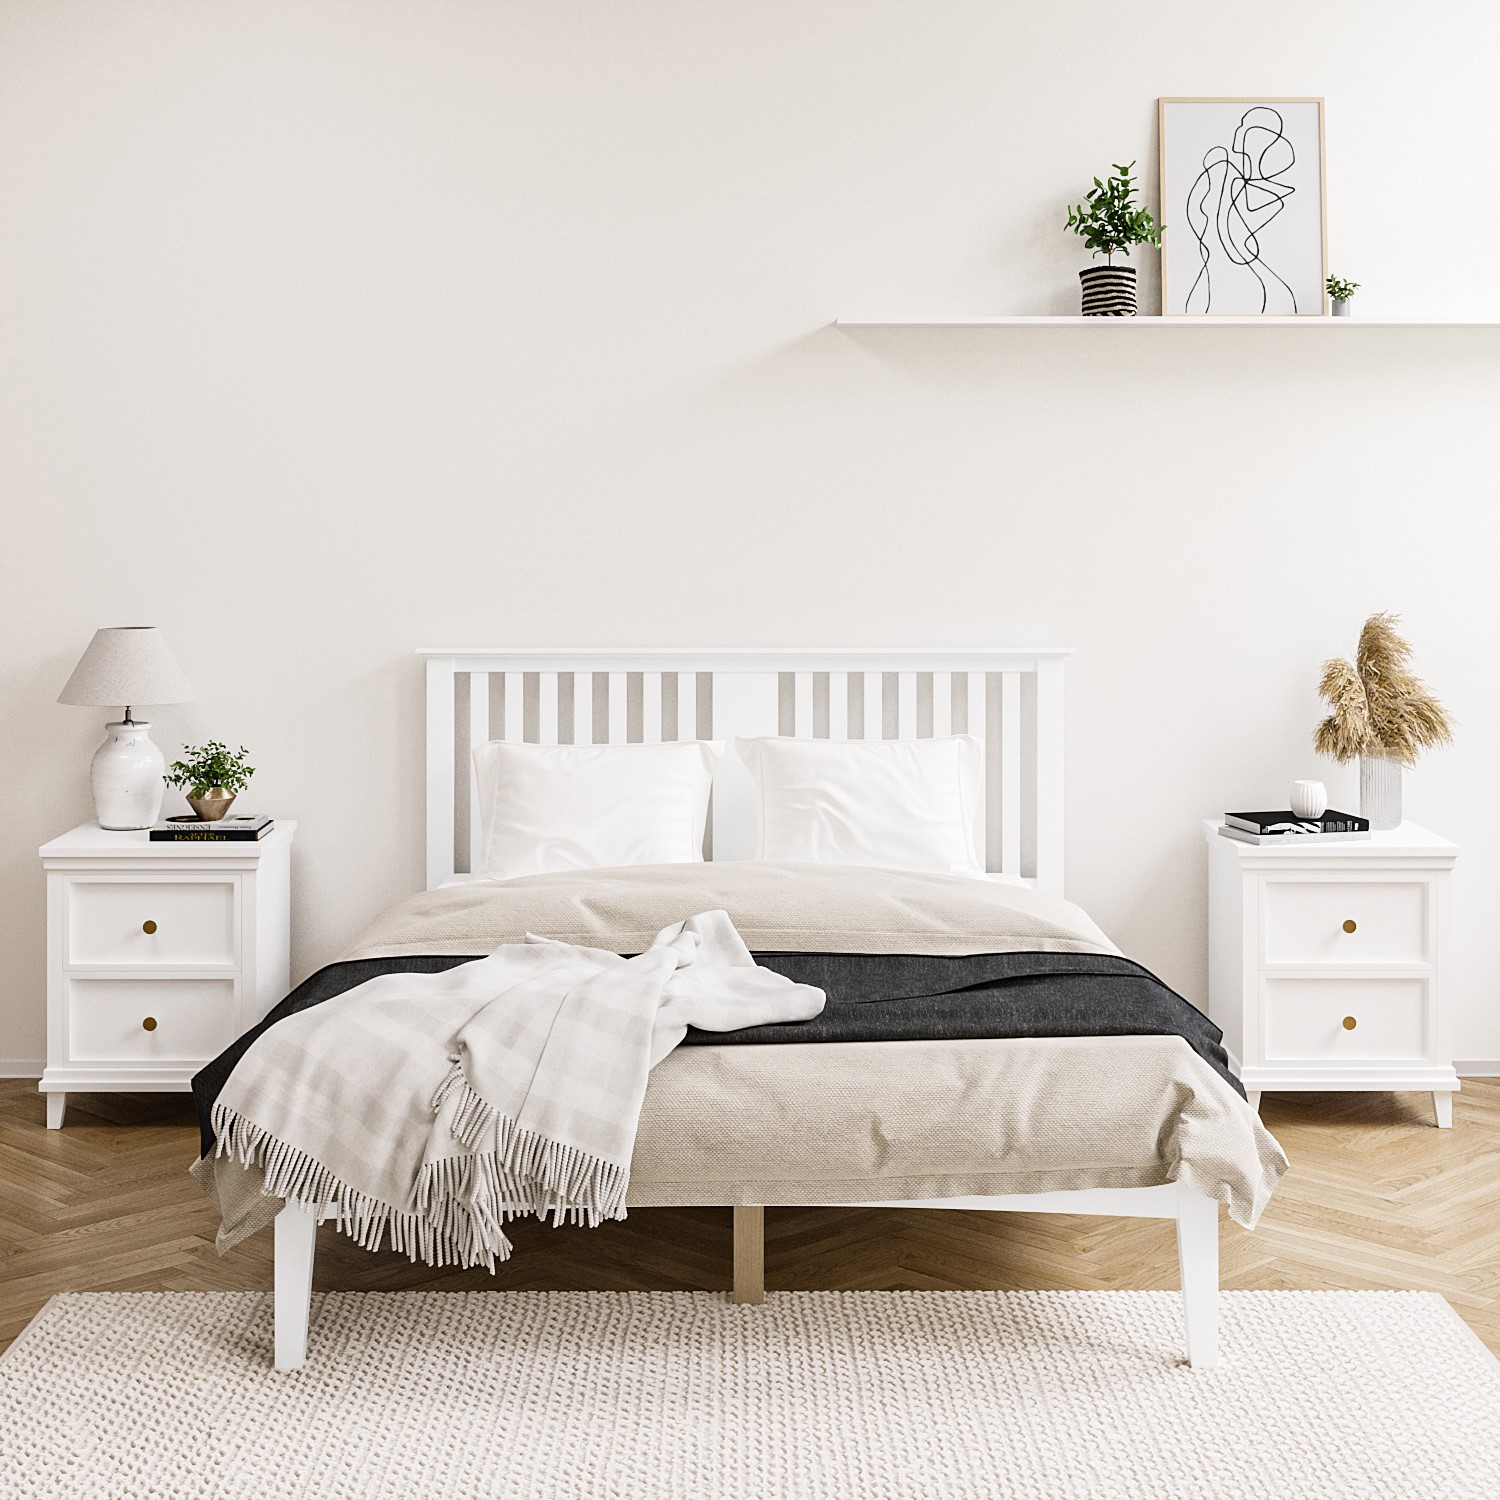 Read more about White wooden king size bed frame with headboard charlie